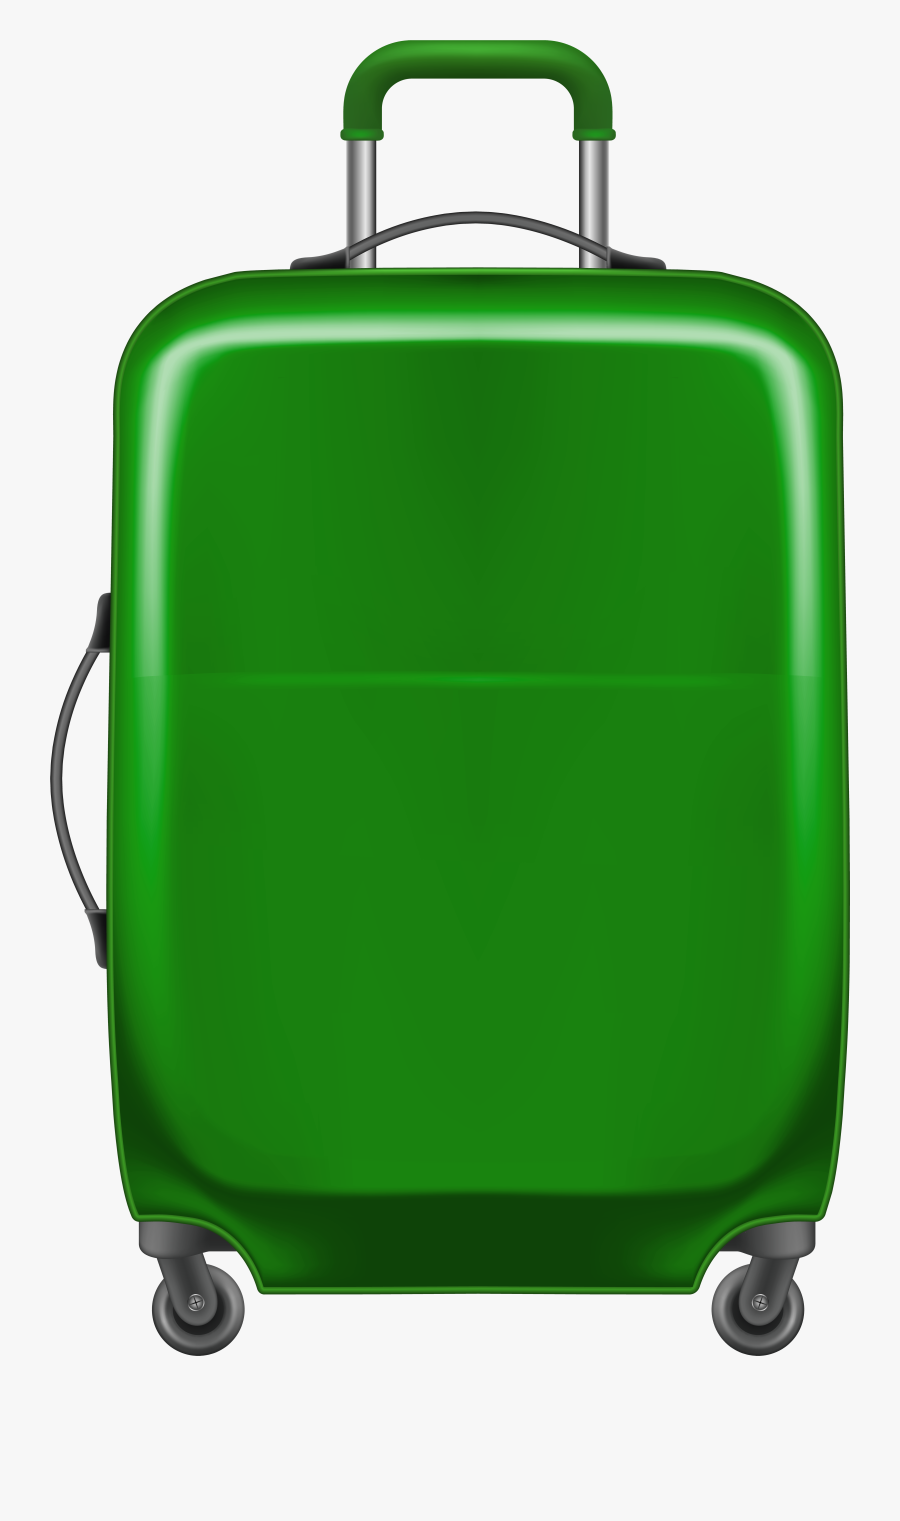 Luggage Clipart Green Suitcase - Trolley Bag Clipart, Transparent Clipart